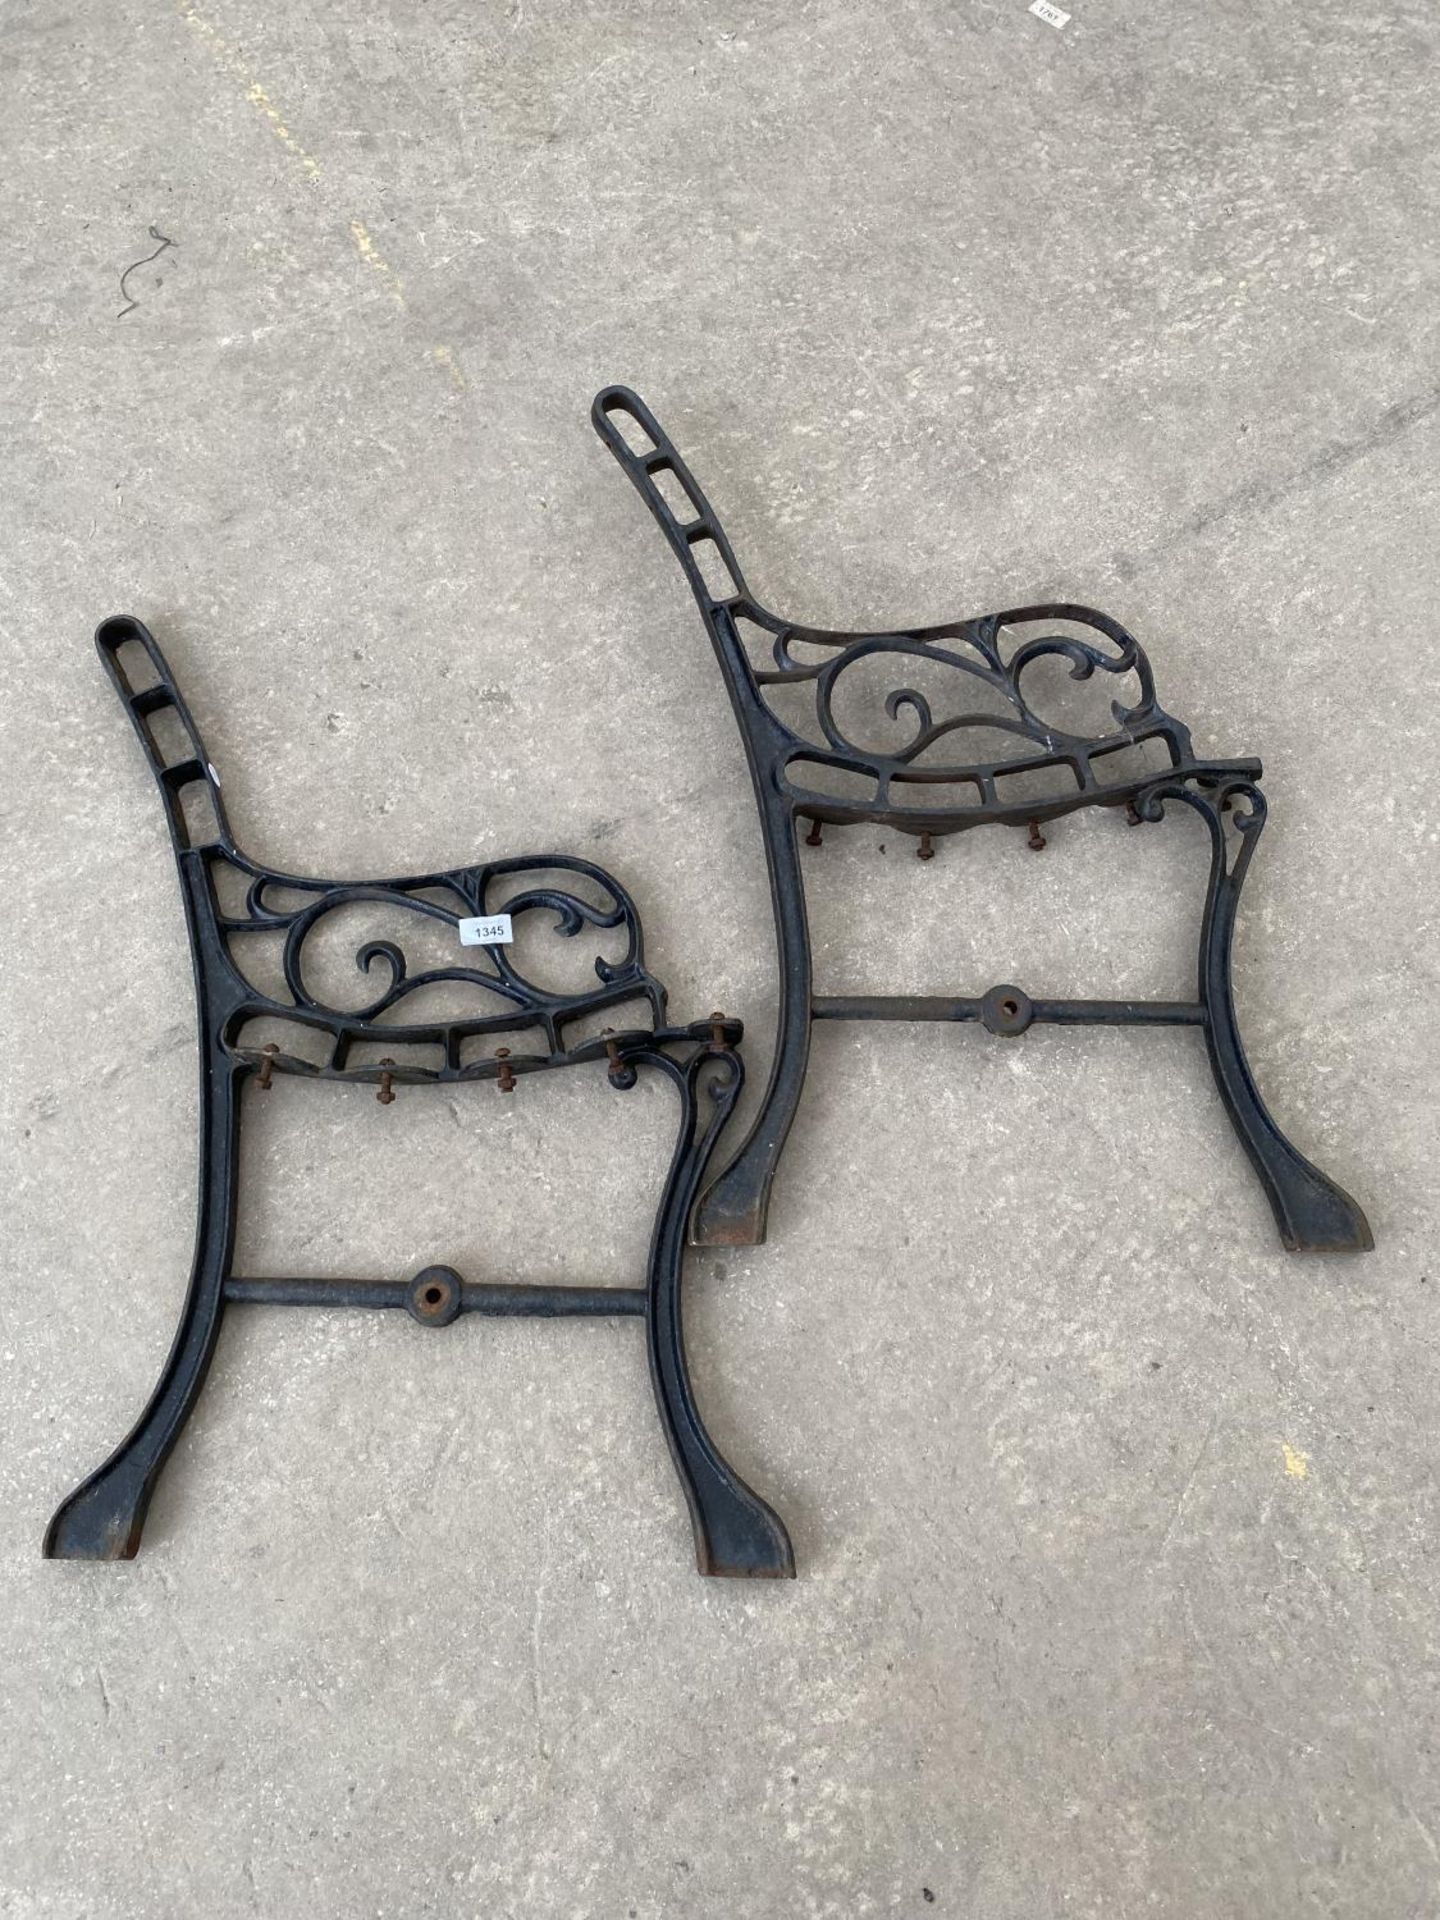 A PAIR OF DECORATIVE CAST IRON BENCH ENDS